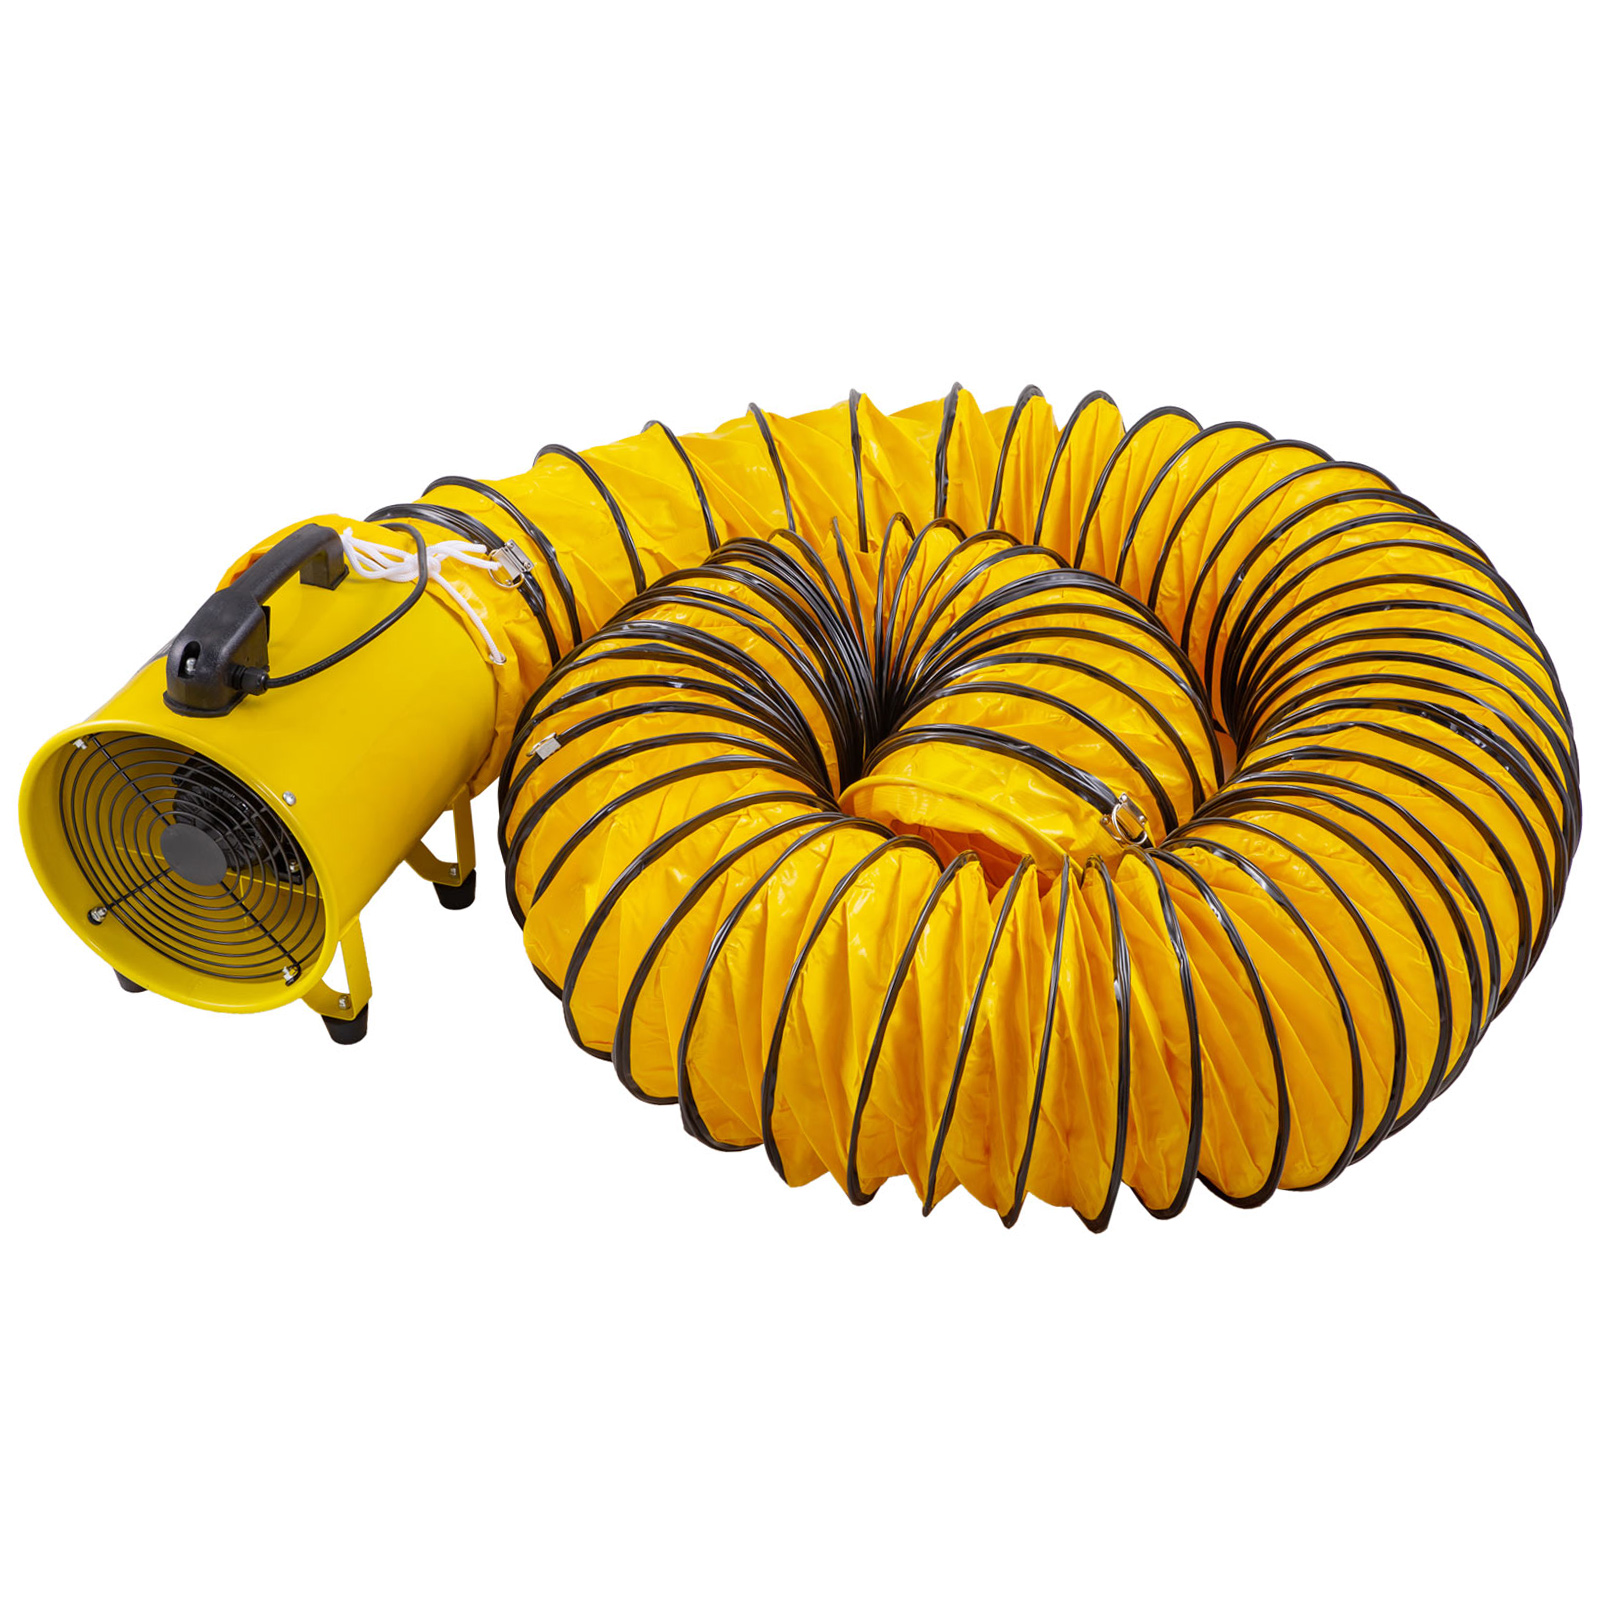 8/10/12/16"Extractor Fan Blower portable Ventilator 5/10M Duct Hose Double Speed 